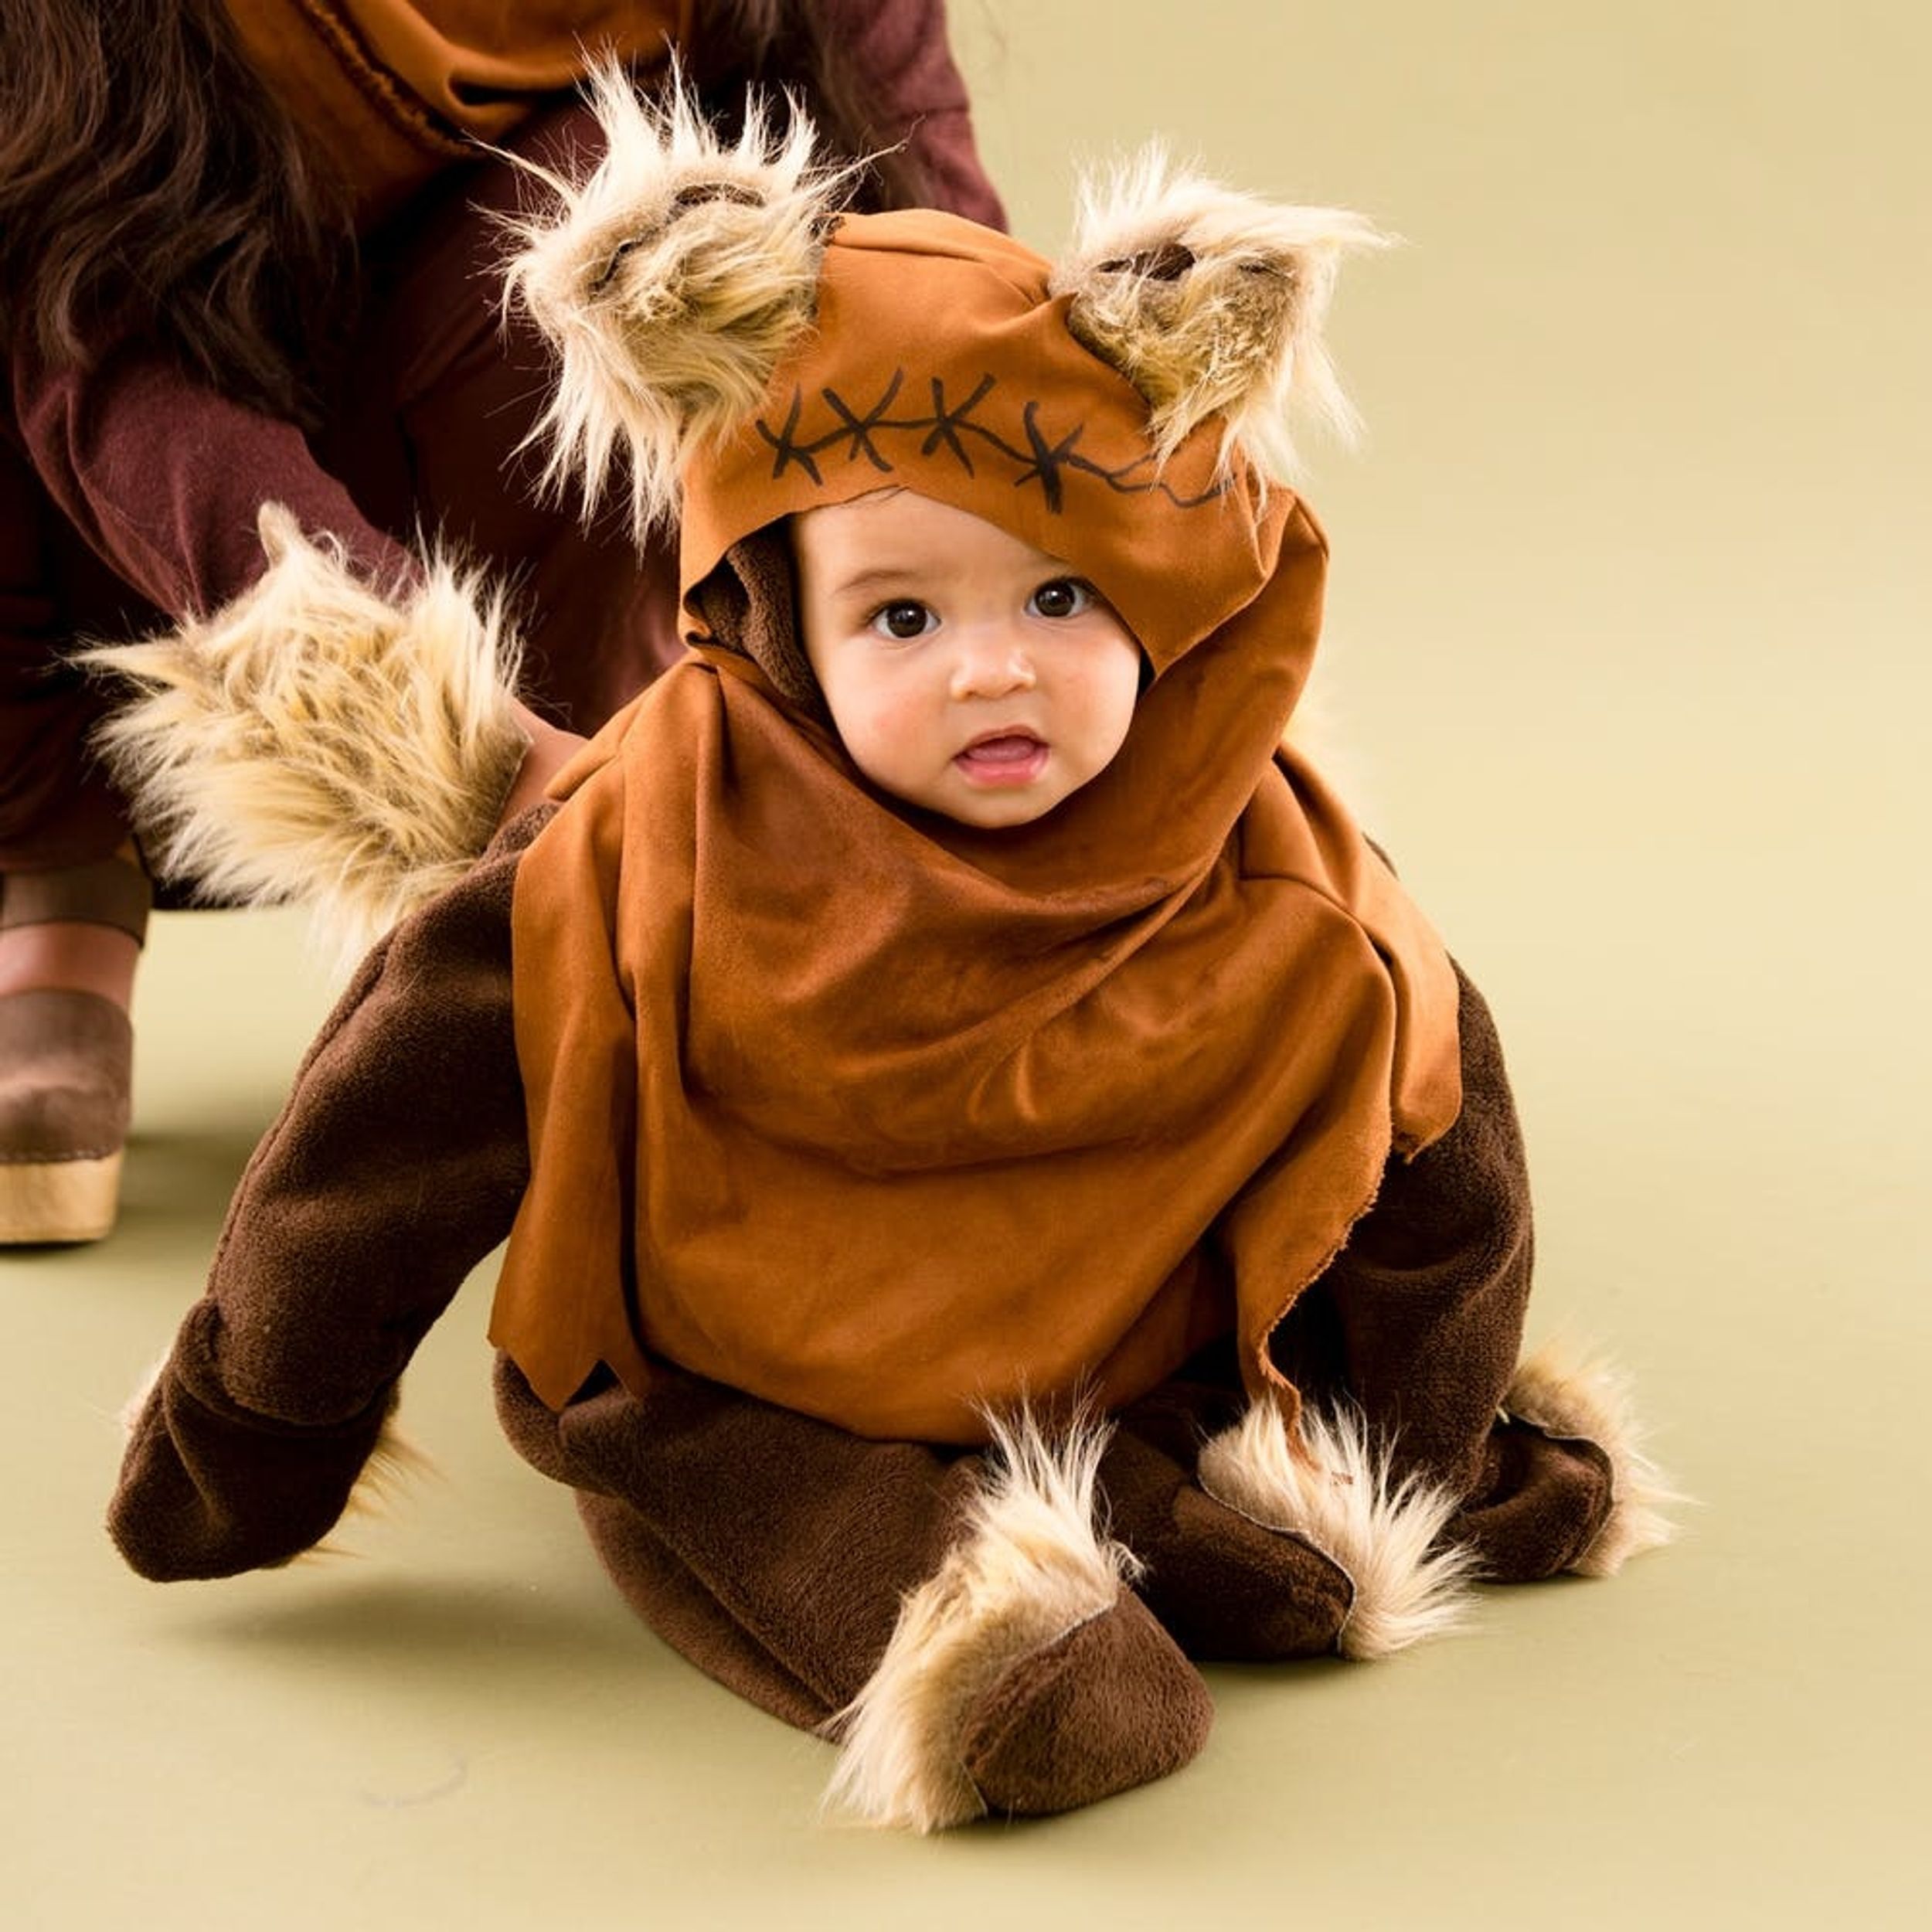 The 32 Best Baby Halloween Costume Ideas Ever